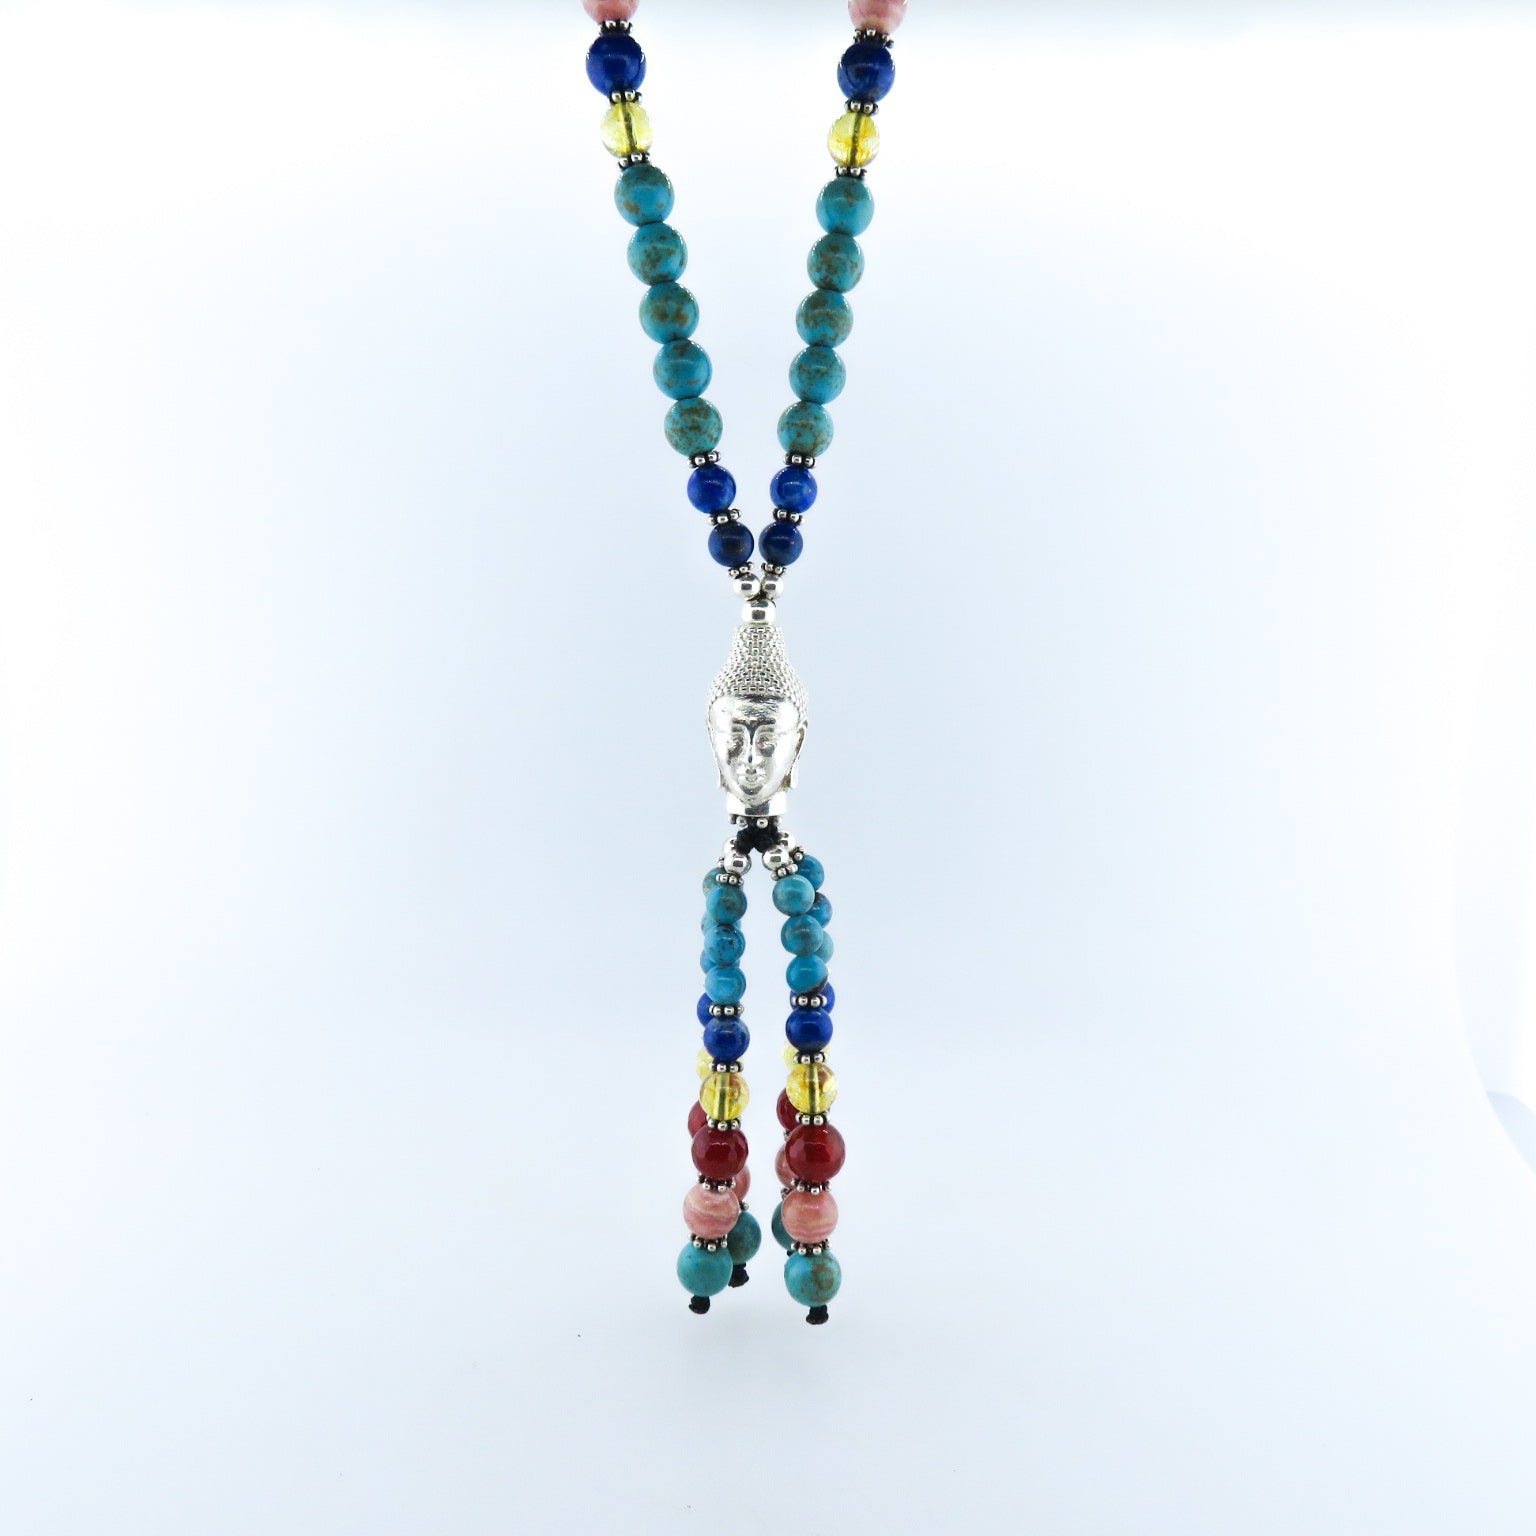 Turquoise Bead Necklace with Silver Buddha Head, Rhodochrosite, Carnelian, Citrine, Kyanite, Lapis Lazuli and Silver Beads